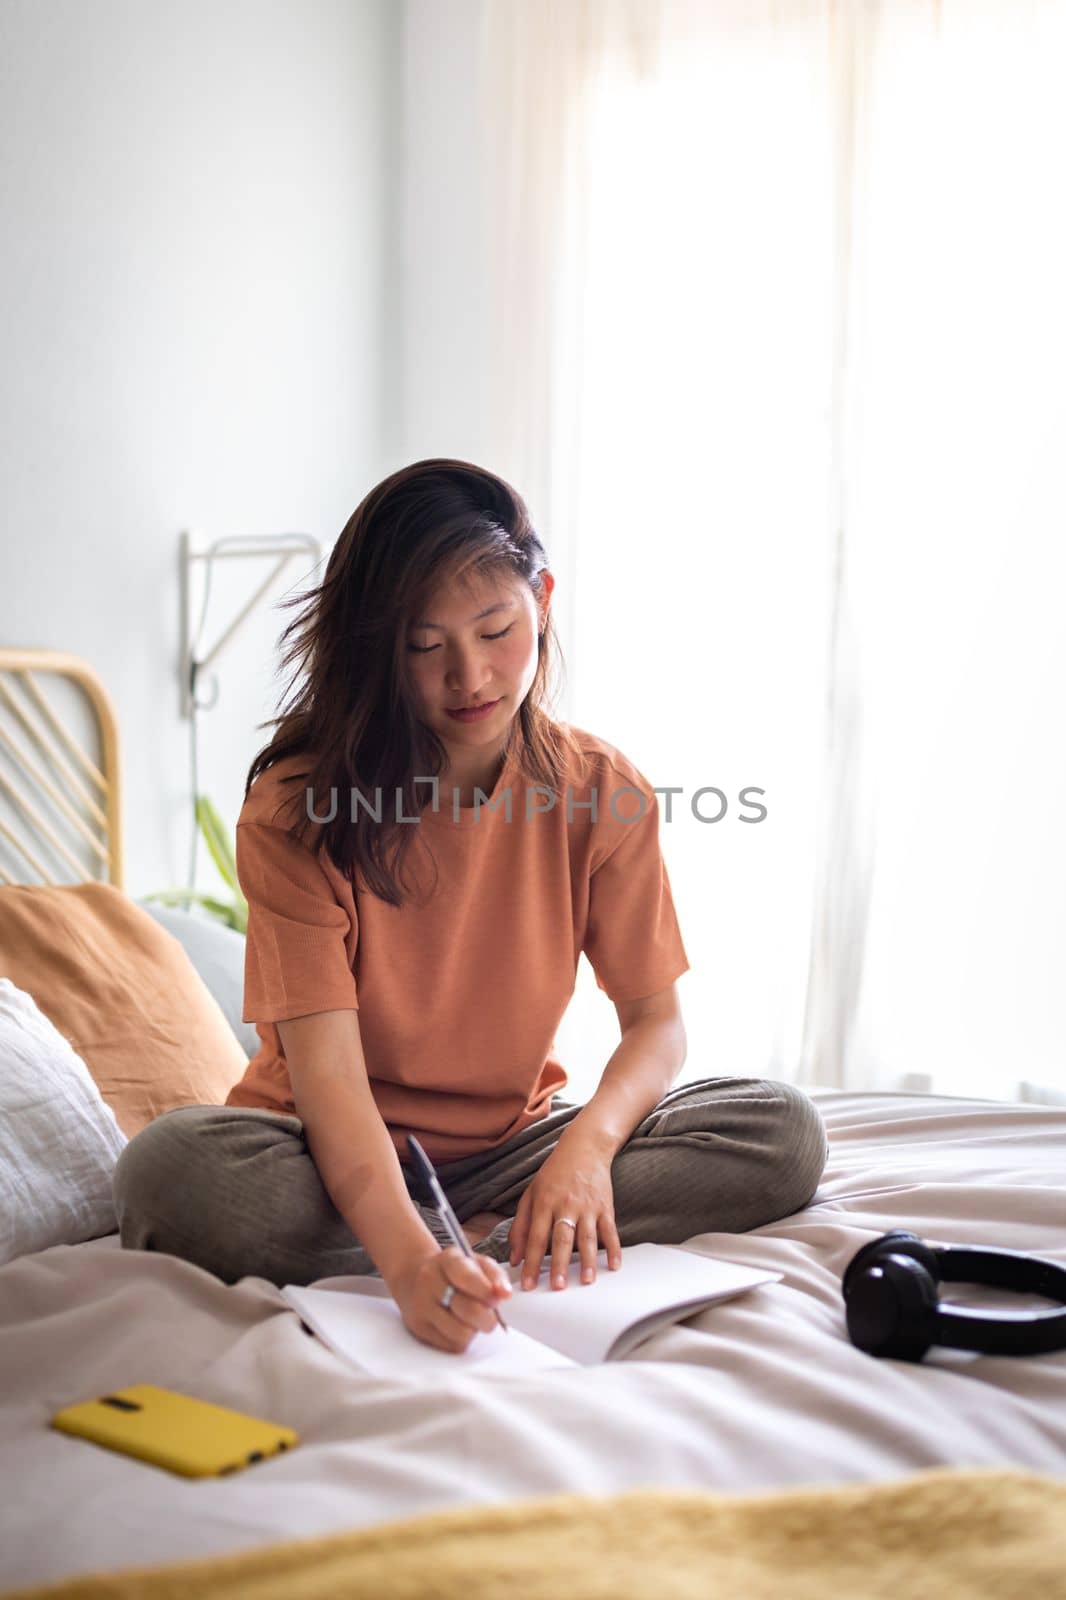 Asian female teen college student sitting on bed writing on journal in cozy bedroom. Copy space. Vertical image. by Hoverstock